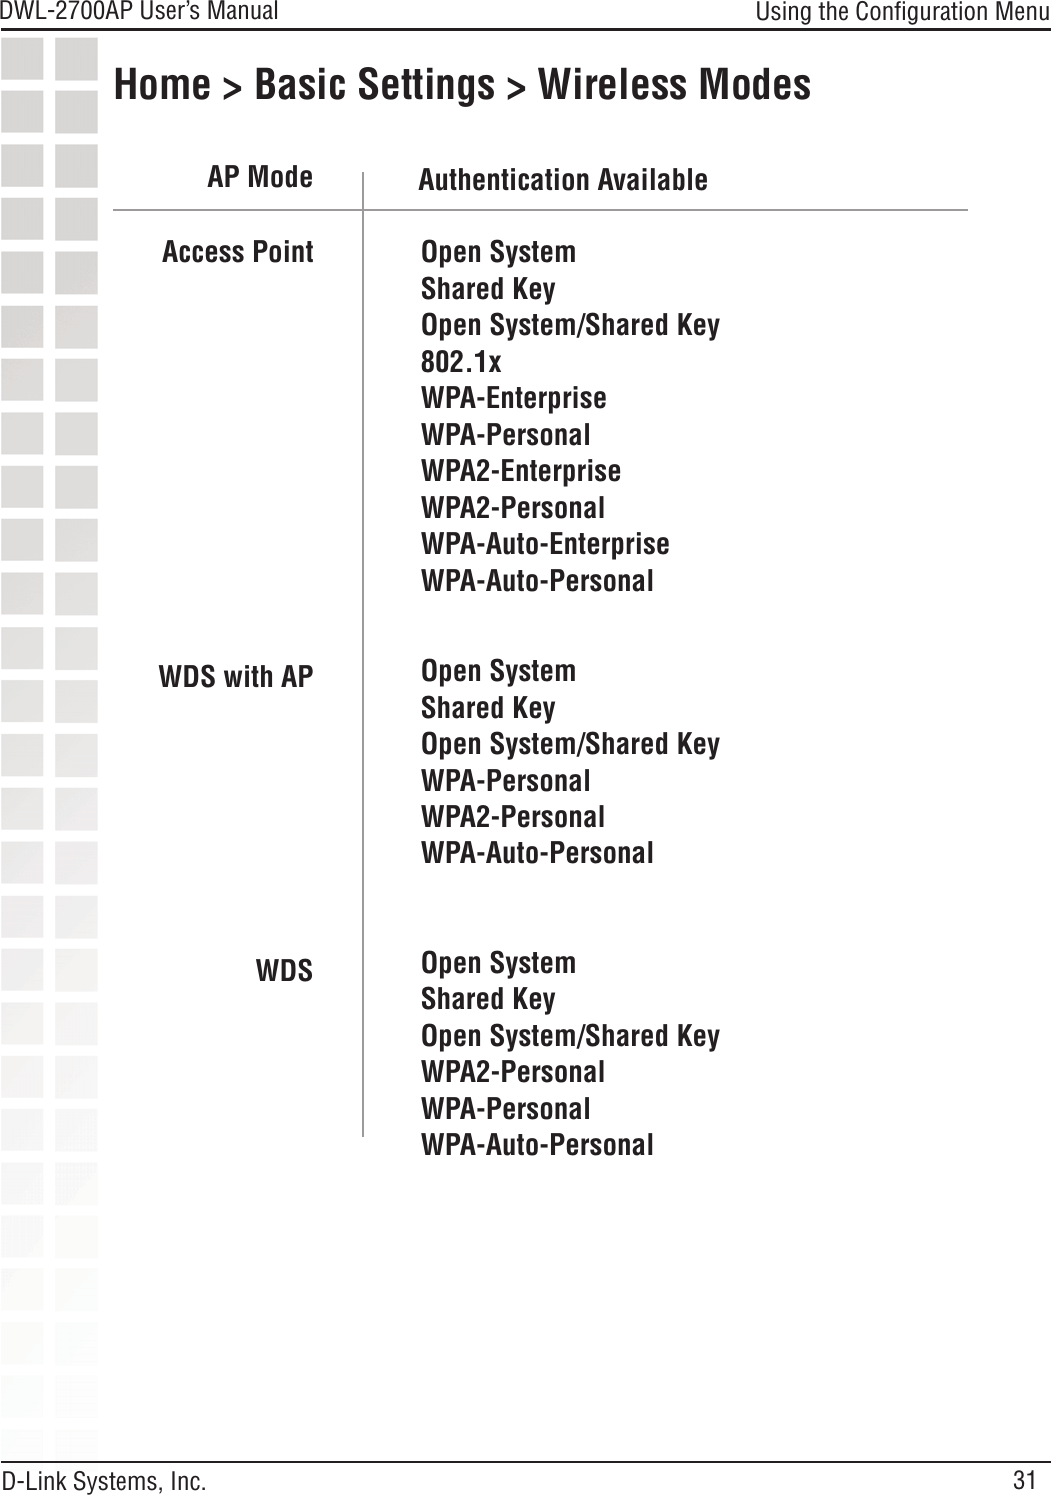 31DWL-2700AP User’s Manual D-Link Systems, Inc.Access PointWDS with APWDSOpen SystemShared KeyOpen System/Shared Key802.1xWPA-EnterpriseWPA-PersonalWPA2-EnterpriseWPA2-PersonalWPA-Auto-EnterpriseWPA-Auto-PersonalOpen SystemShared KeyOpen System/Shared KeyWPA-PersonalWPA2-PersonalWPA-Auto-PersonalOpen SystemShared KeyOpen System/Shared KeyWPA2-PersonalWPA-PersonalWPA-Auto-PersonalAP Mode Authentication AvailableHome &gt; Basic Settings &gt; Wireless ModesUsing the Conﬁguration Menu